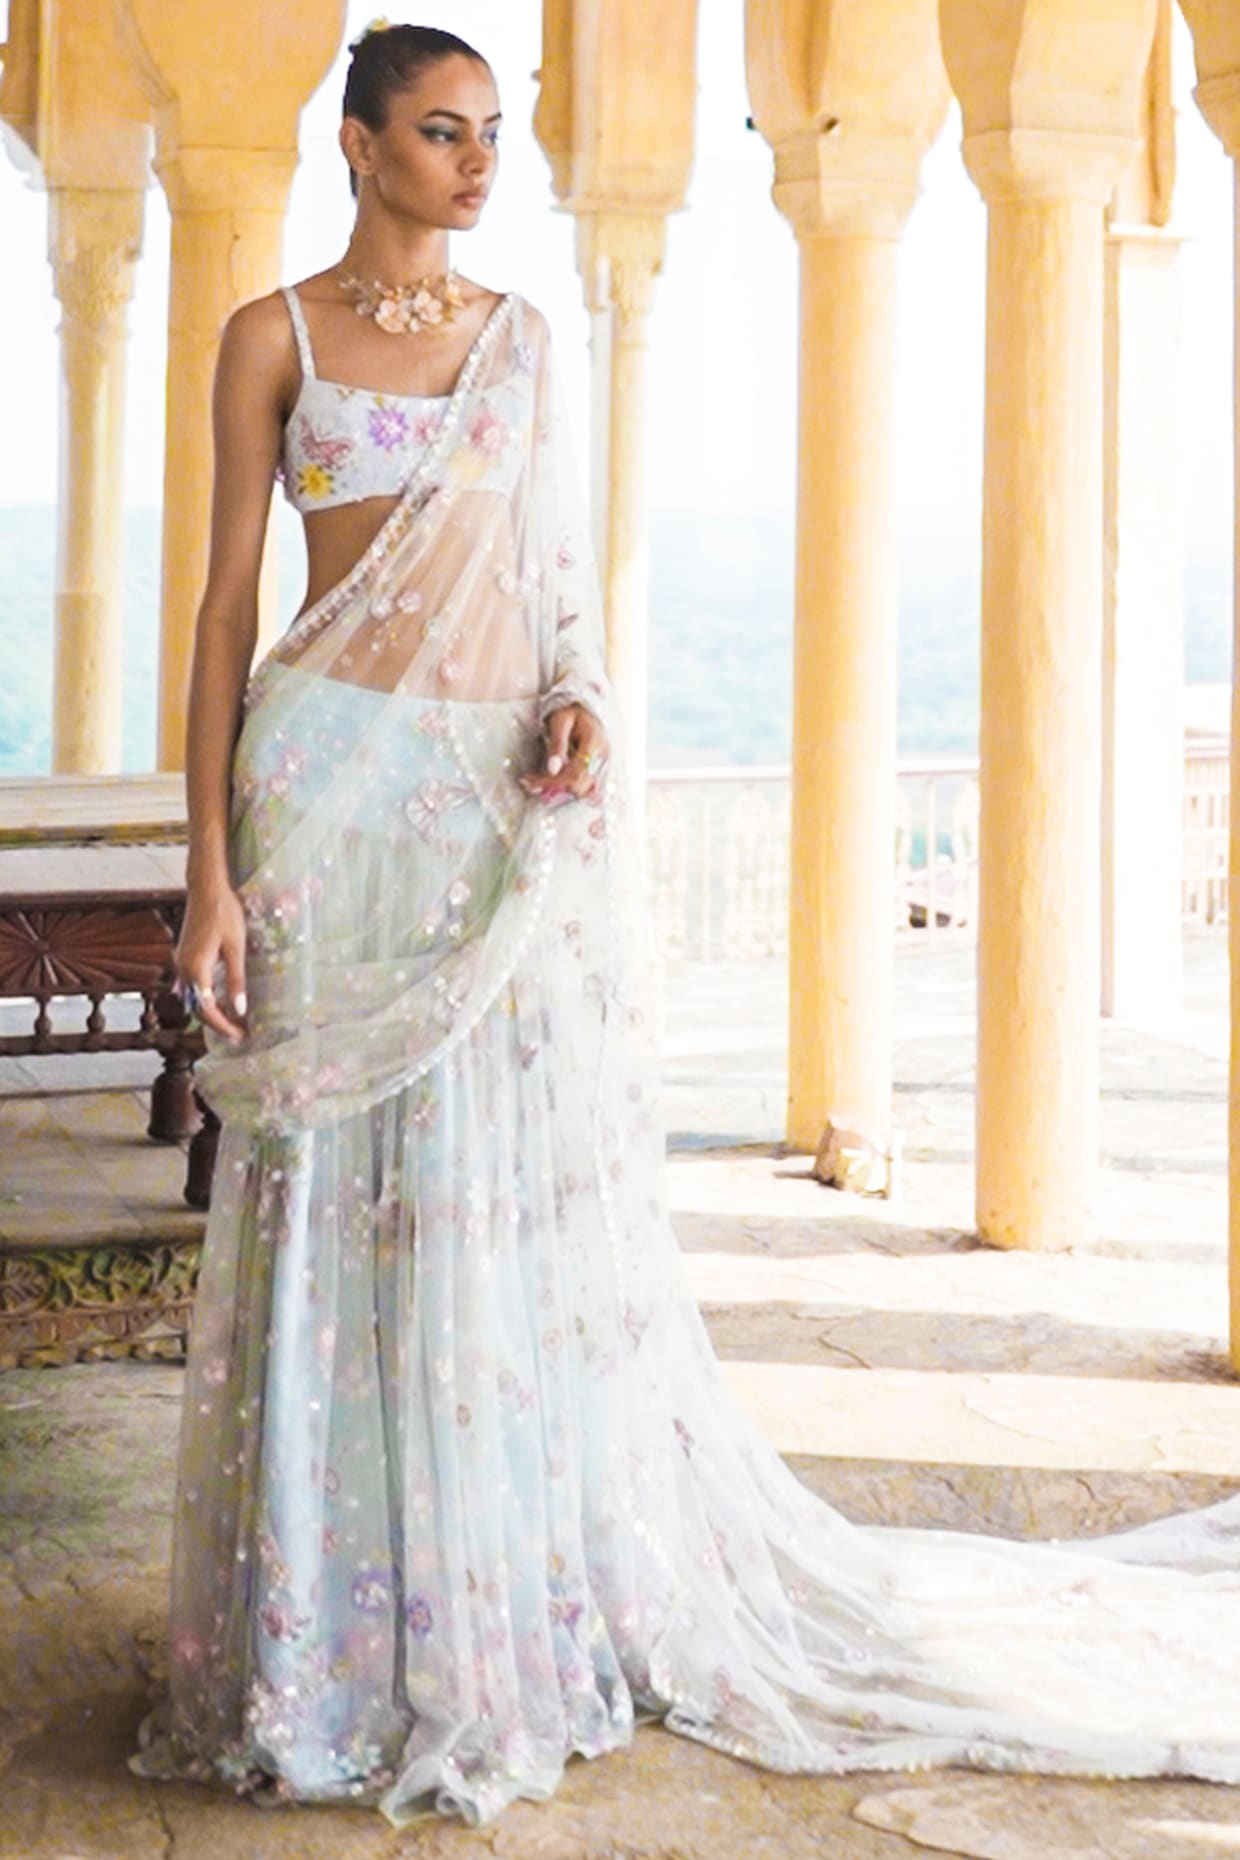 Pre Pleated Saree – A Great Innovation – India's Wedding Blog